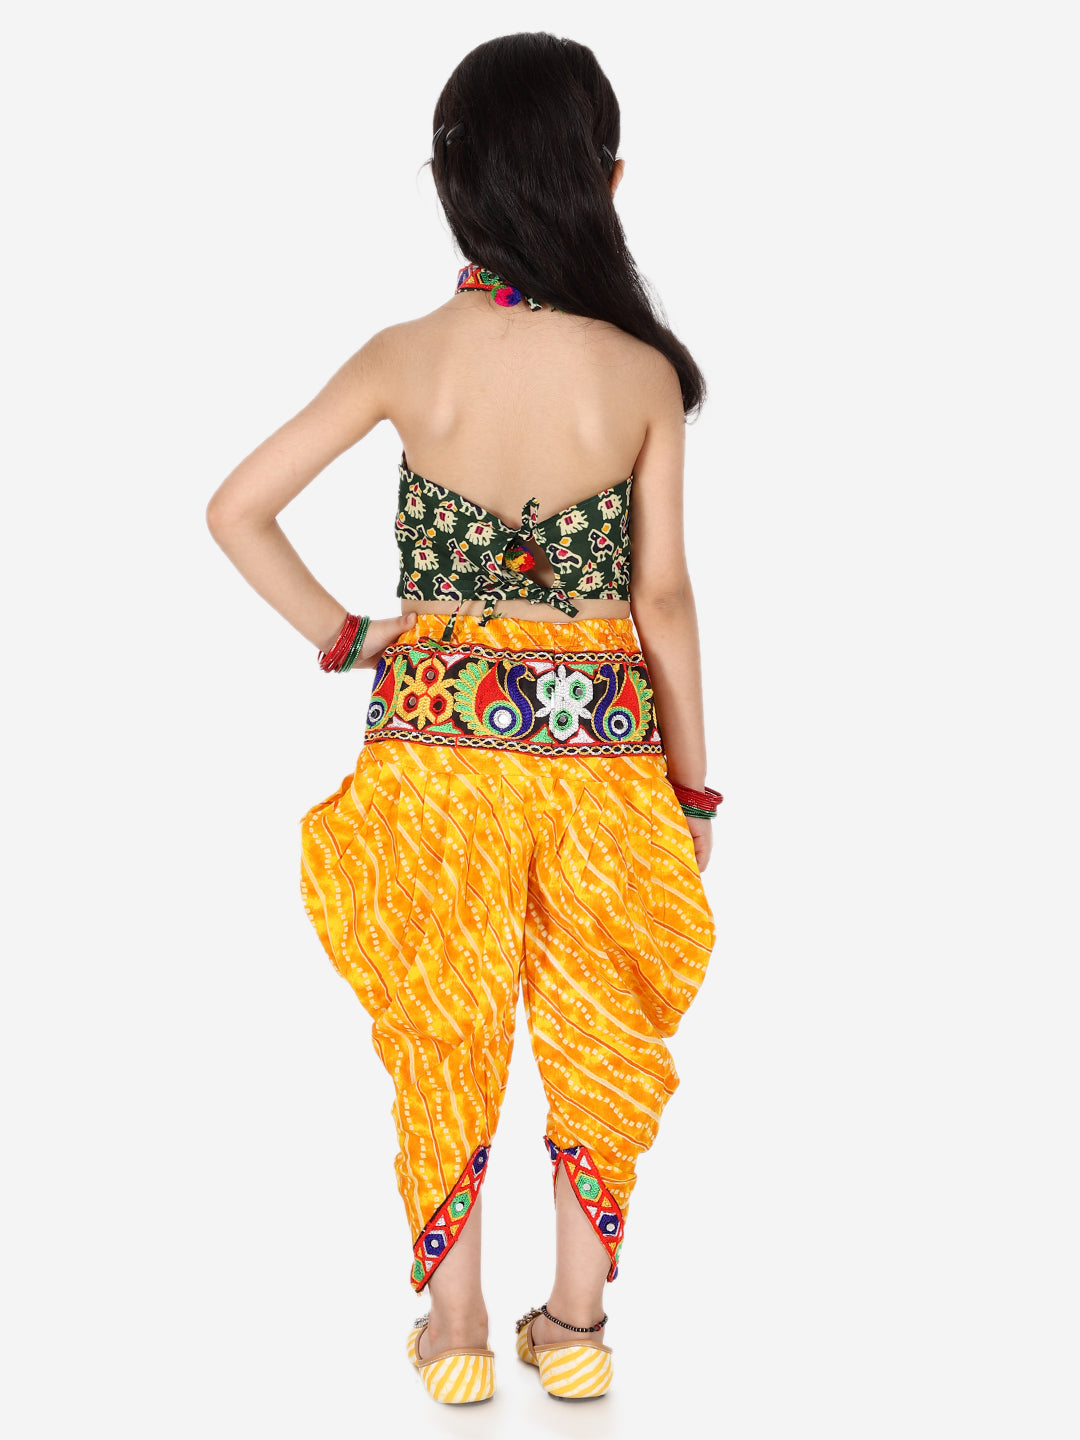 Girls Ethnic Navratri Indo-western Wear Cotton Choli Top with elastic dhoti - Yellow NOZ2TOZ - Made In INDIA.